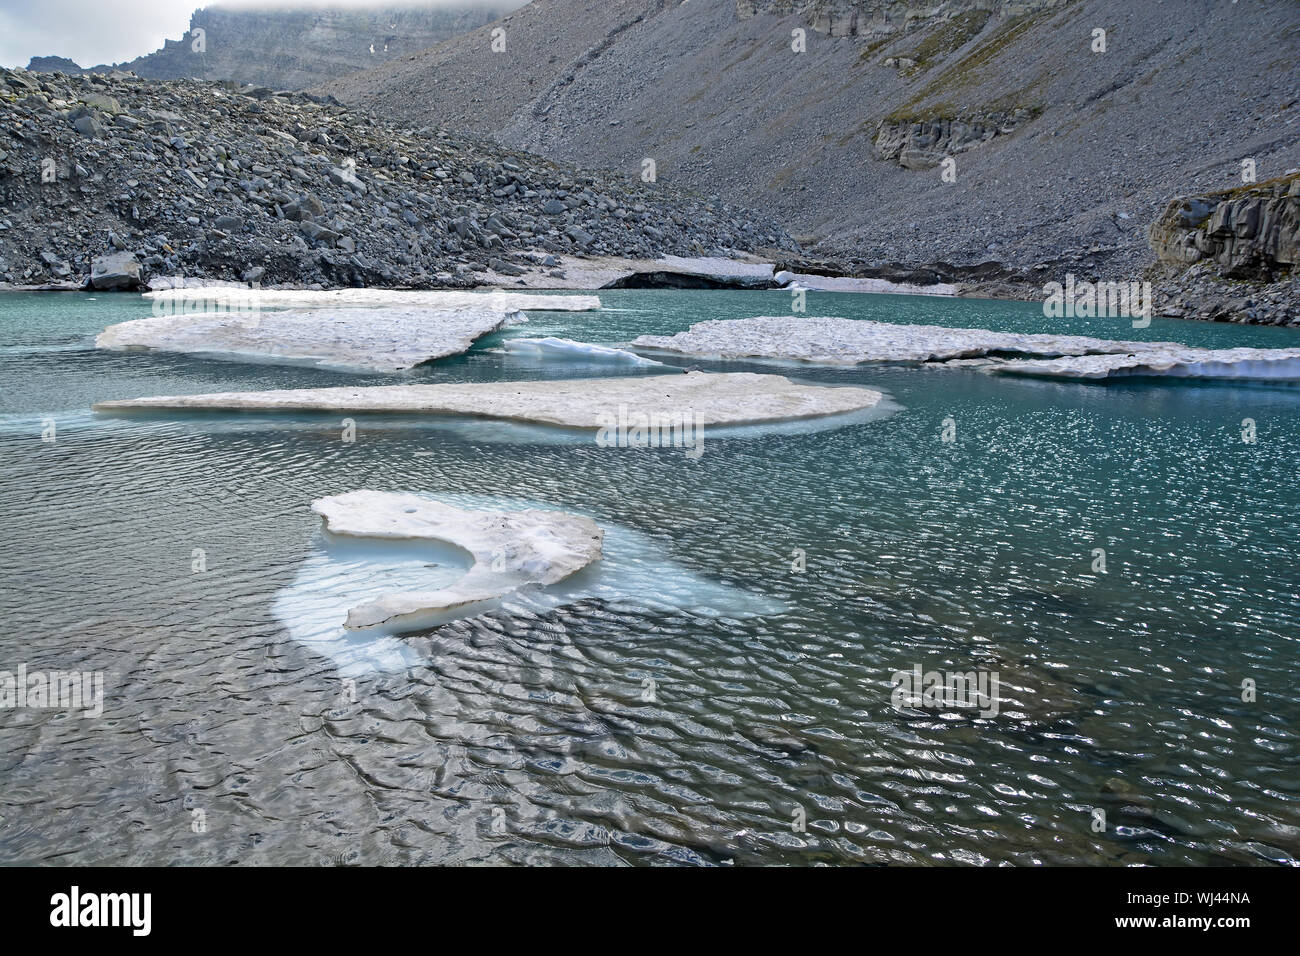 Icebergs broken off from a glacier in a glacial lake in the mountains as the climate warms. Stock Photo